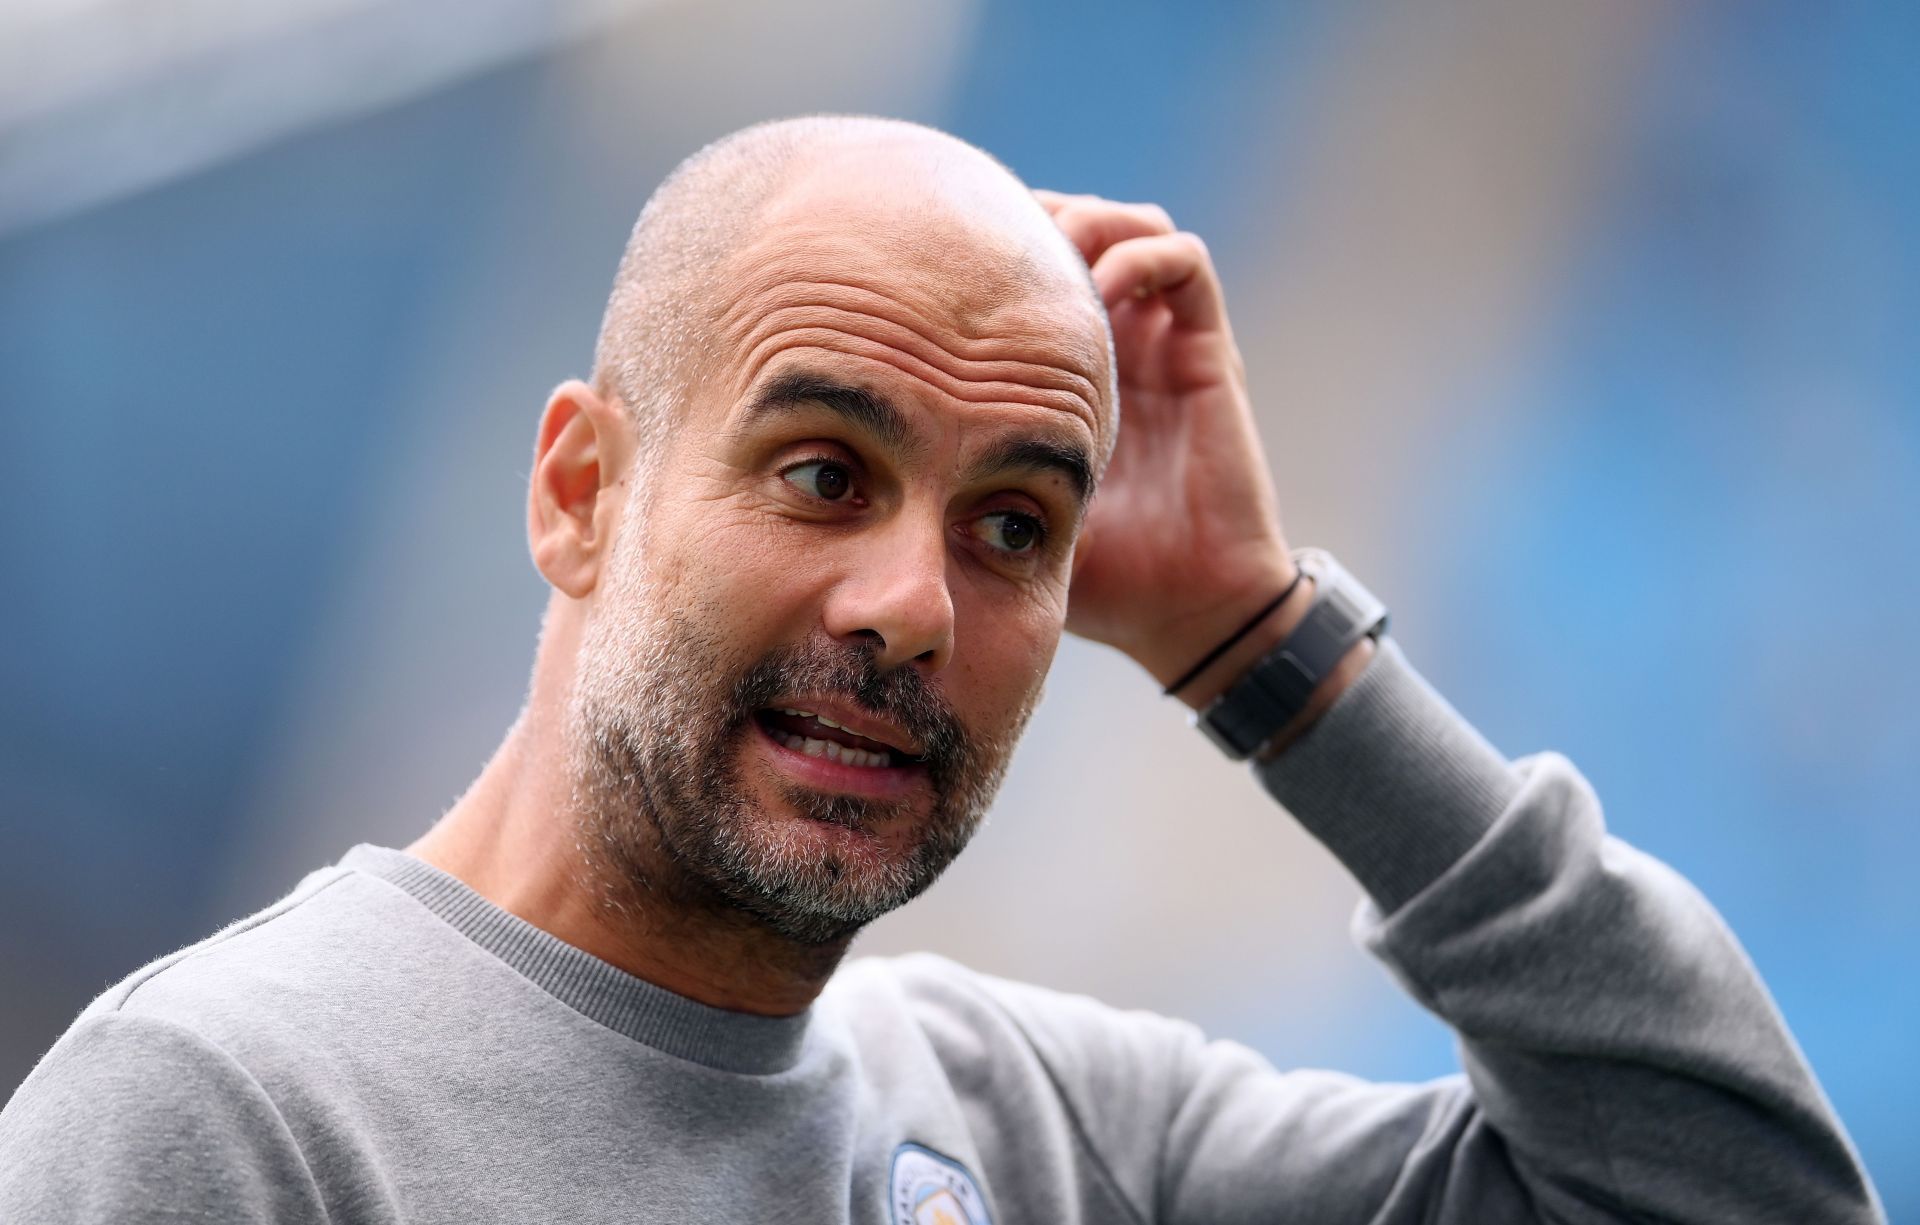 Guardiola is in the running to secure his fourth Premier League title at City